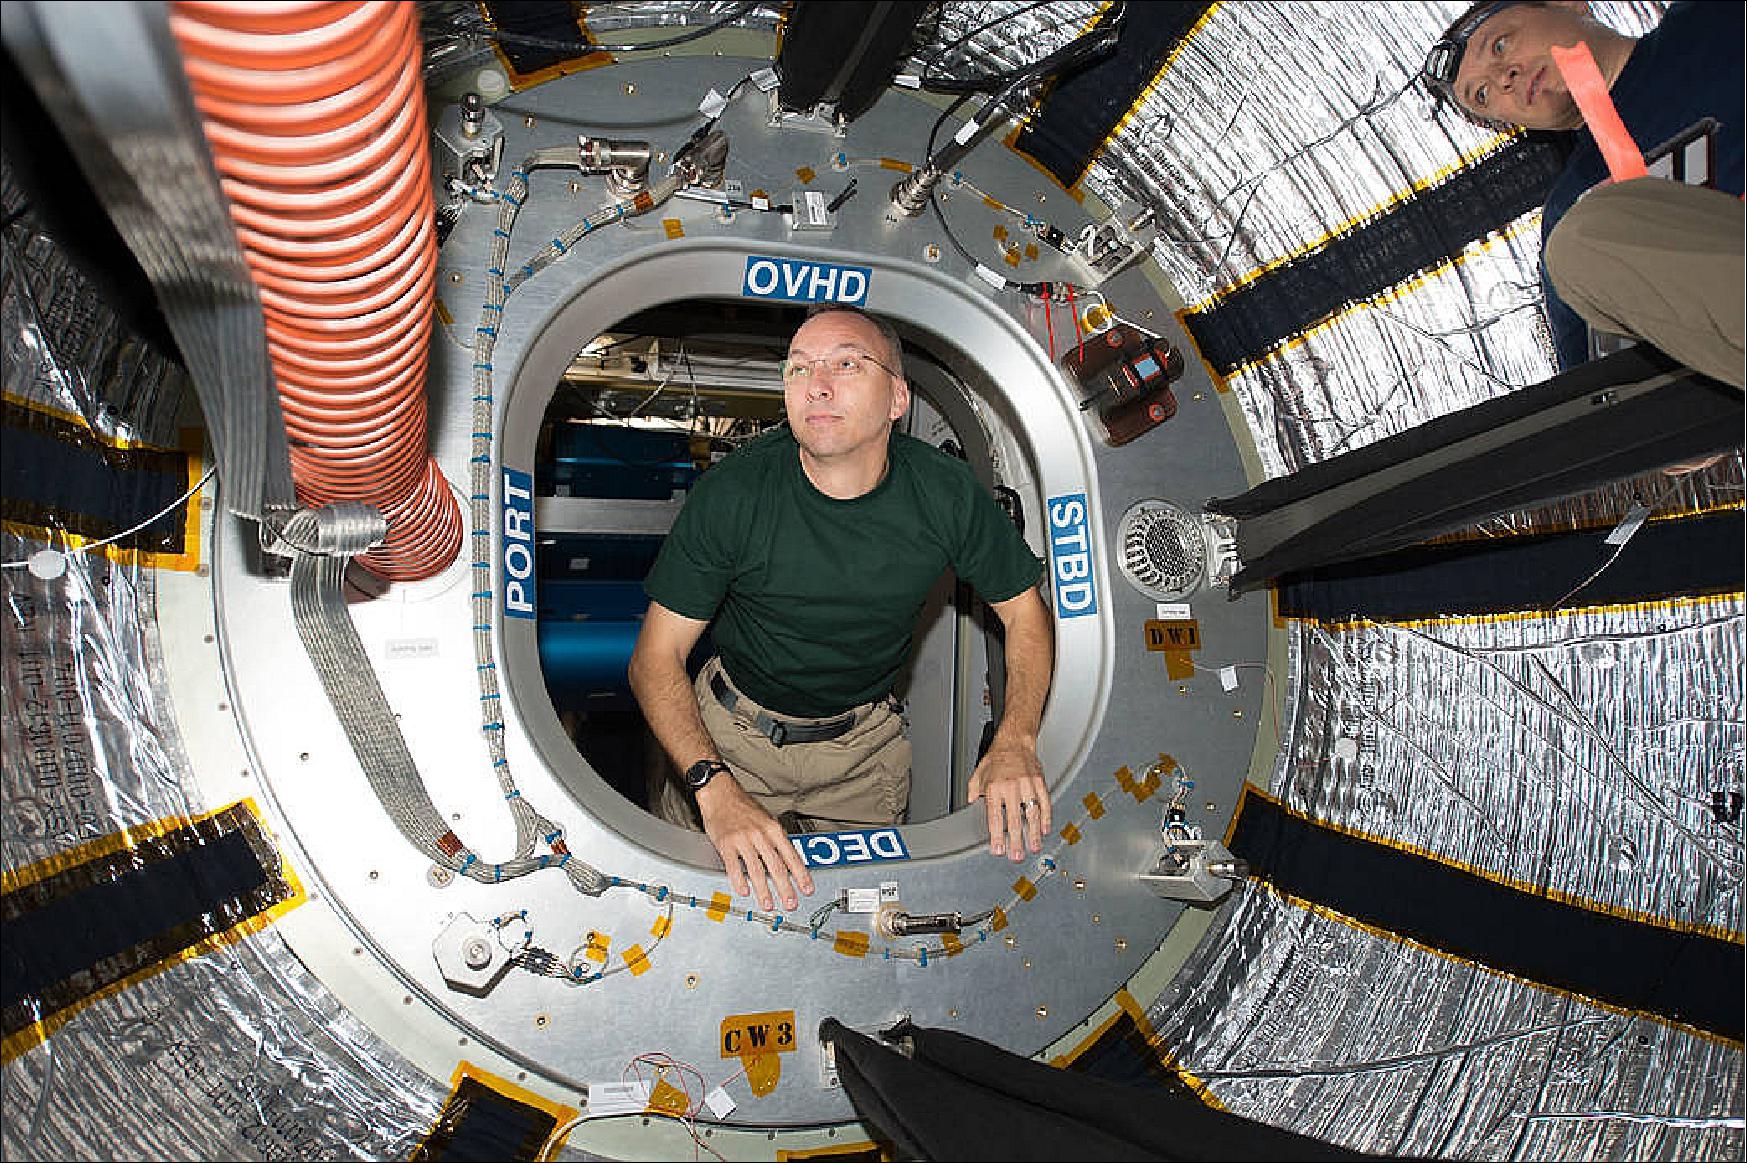 Figure 7: NASA astronaut Randy Bresnik looks through the hatch of the International Space Station's Bigelow Expandable Aerospace Module (BEAM) on July 31, 2017. He shared this photo on social media on August 2, commenting, "Ever wonder how you look when you enter a new part of a spacecraft? Well, this is it. First time inside the expandable BEAM module." (image credit: NASA) 21)